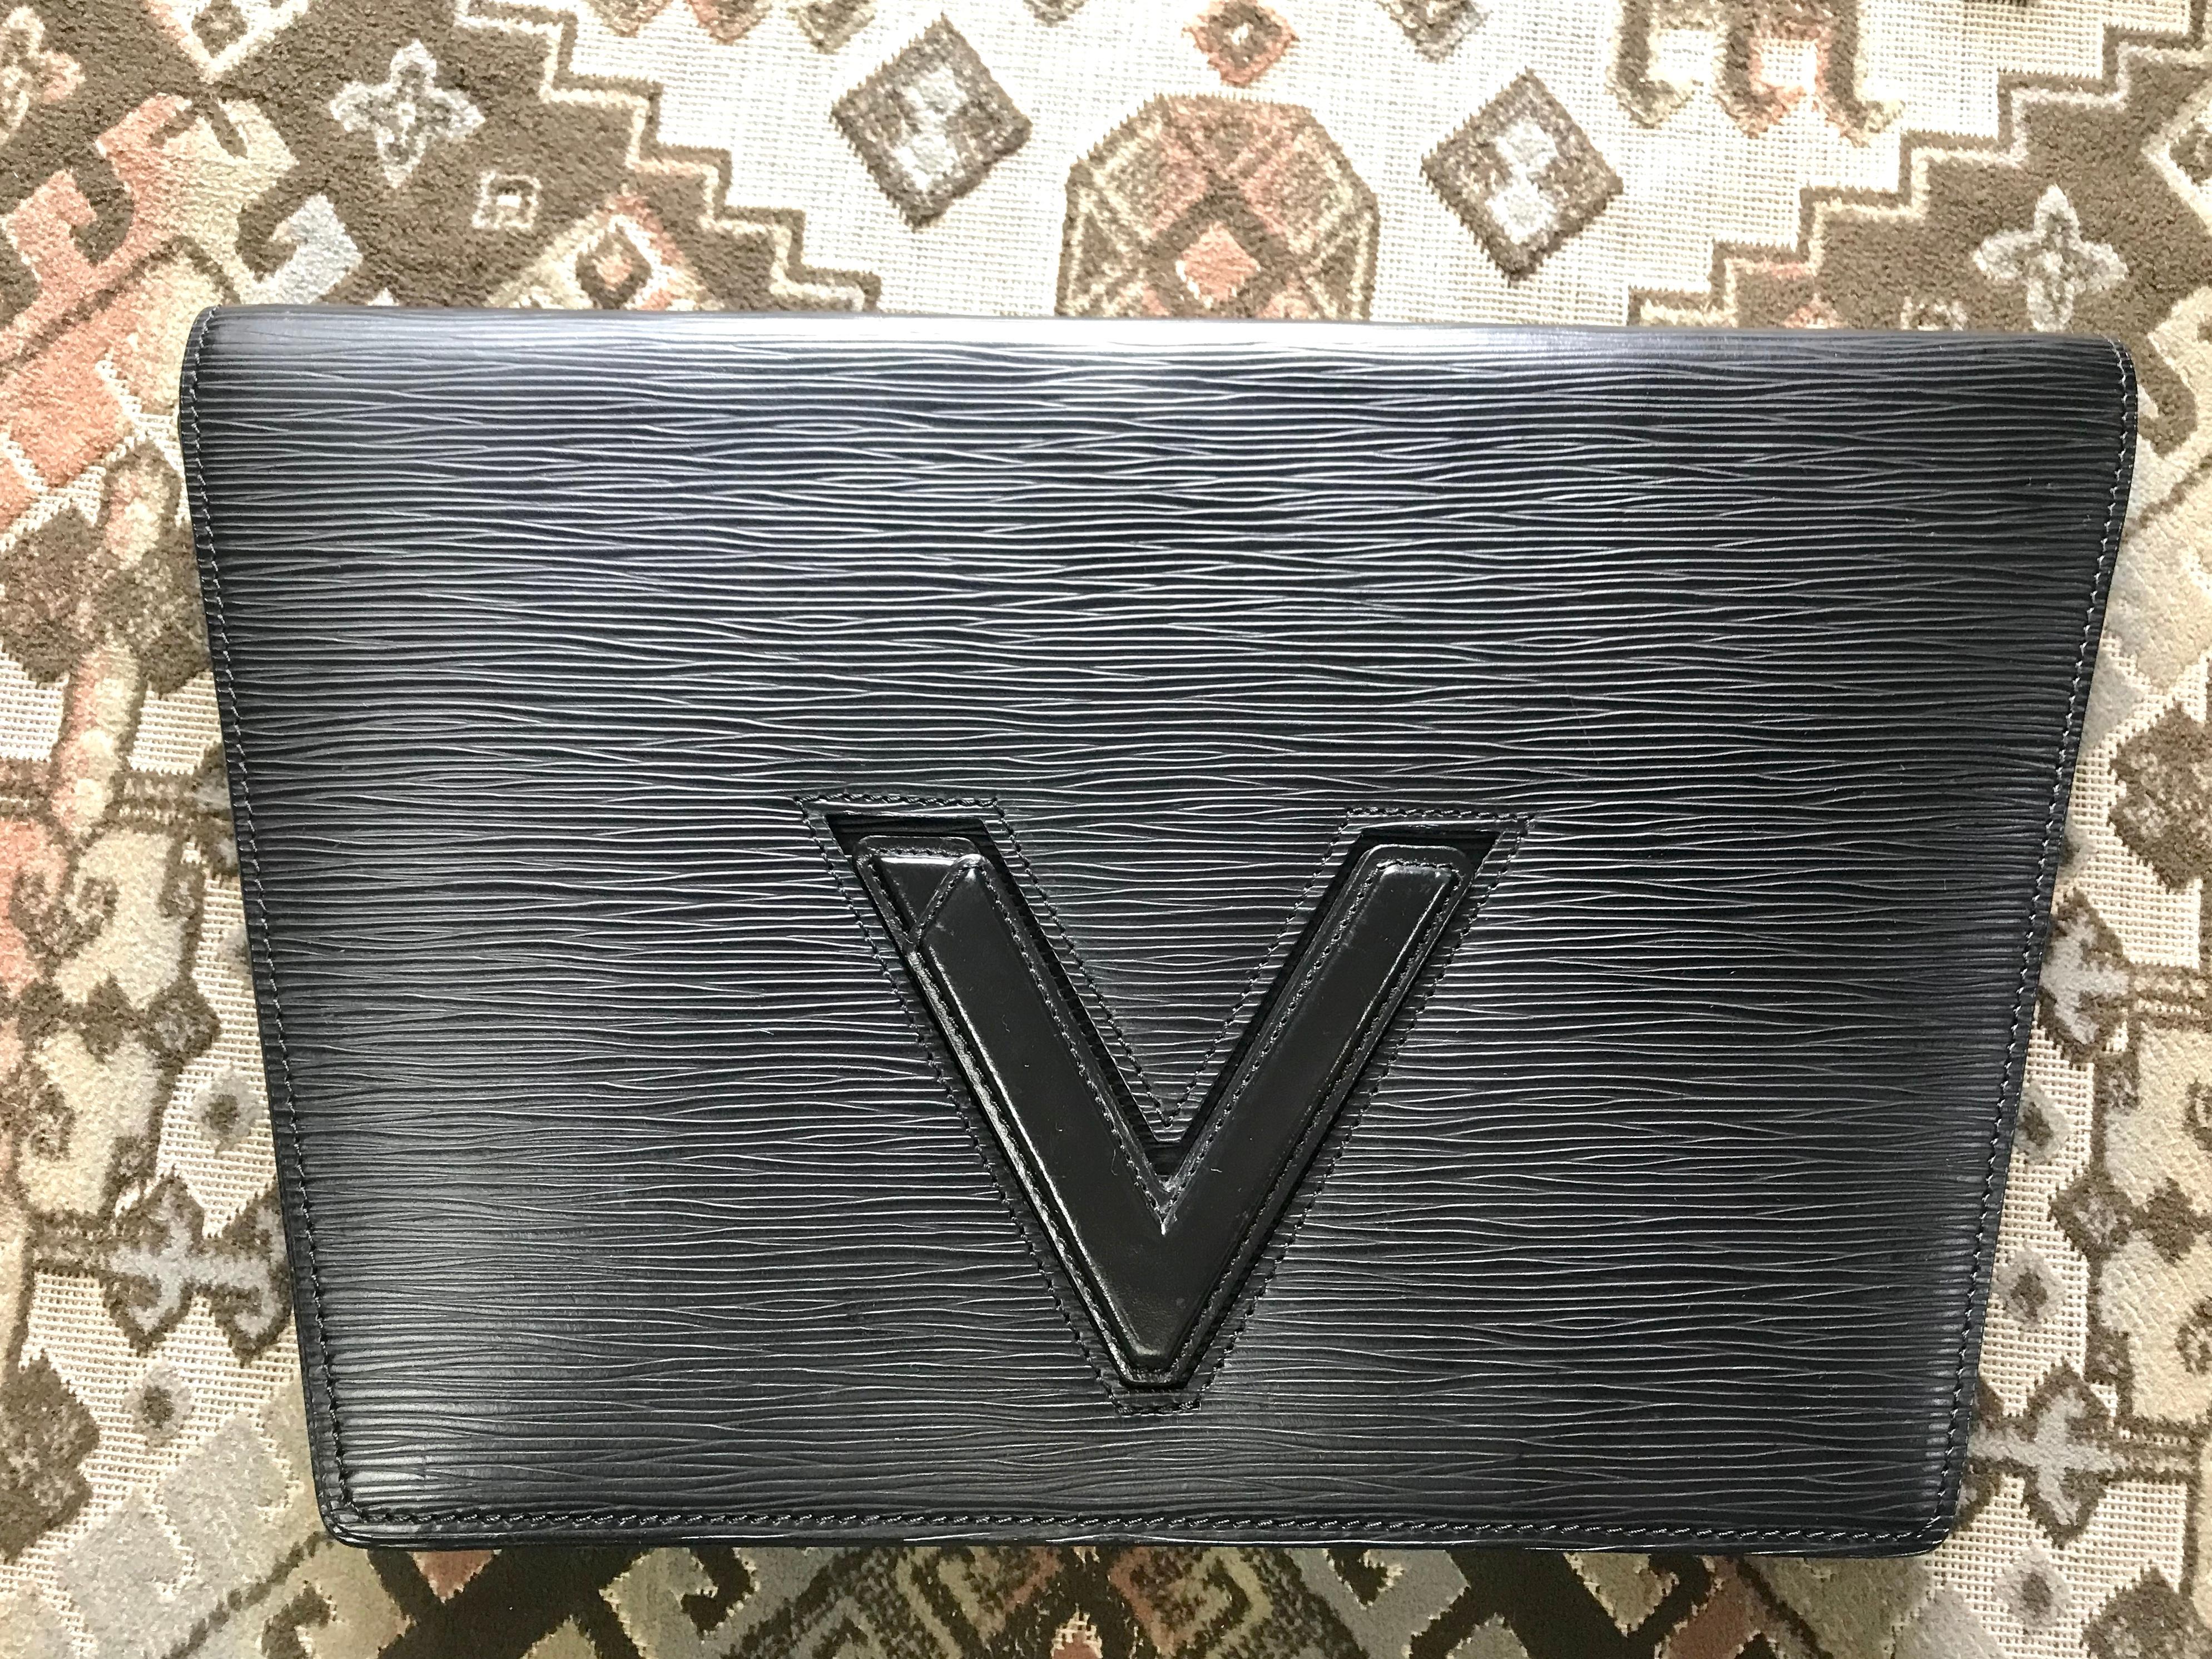 1990s. Vintage Louis Vuitton black epi trapezoid mod style clutch bag.  One of the most unique purses from LOUIS VUITTON, epi line back in the old era. 
Unisex use for all generations.

Take it anywhere and anytime with you for all occasion!
This is